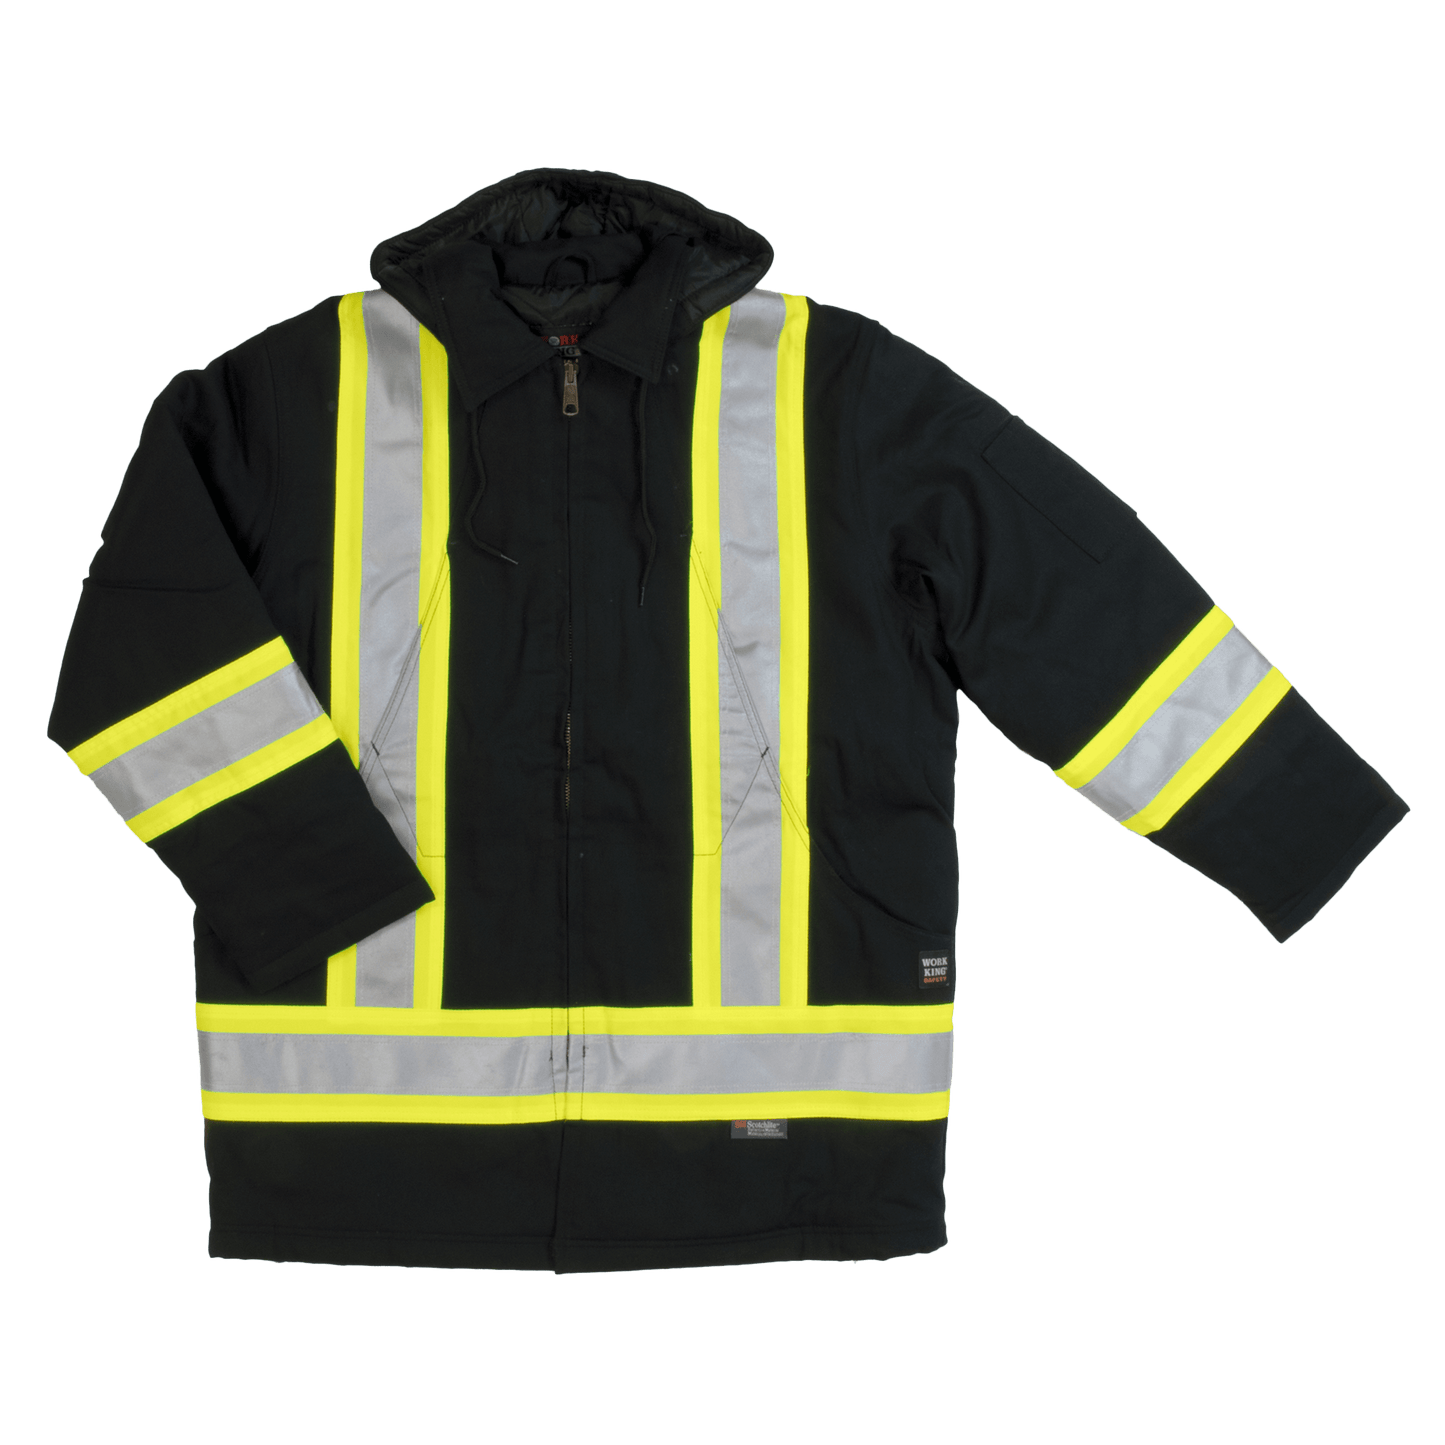 Tough Duck Fleece Lined Safety Jacket - S157 - Black